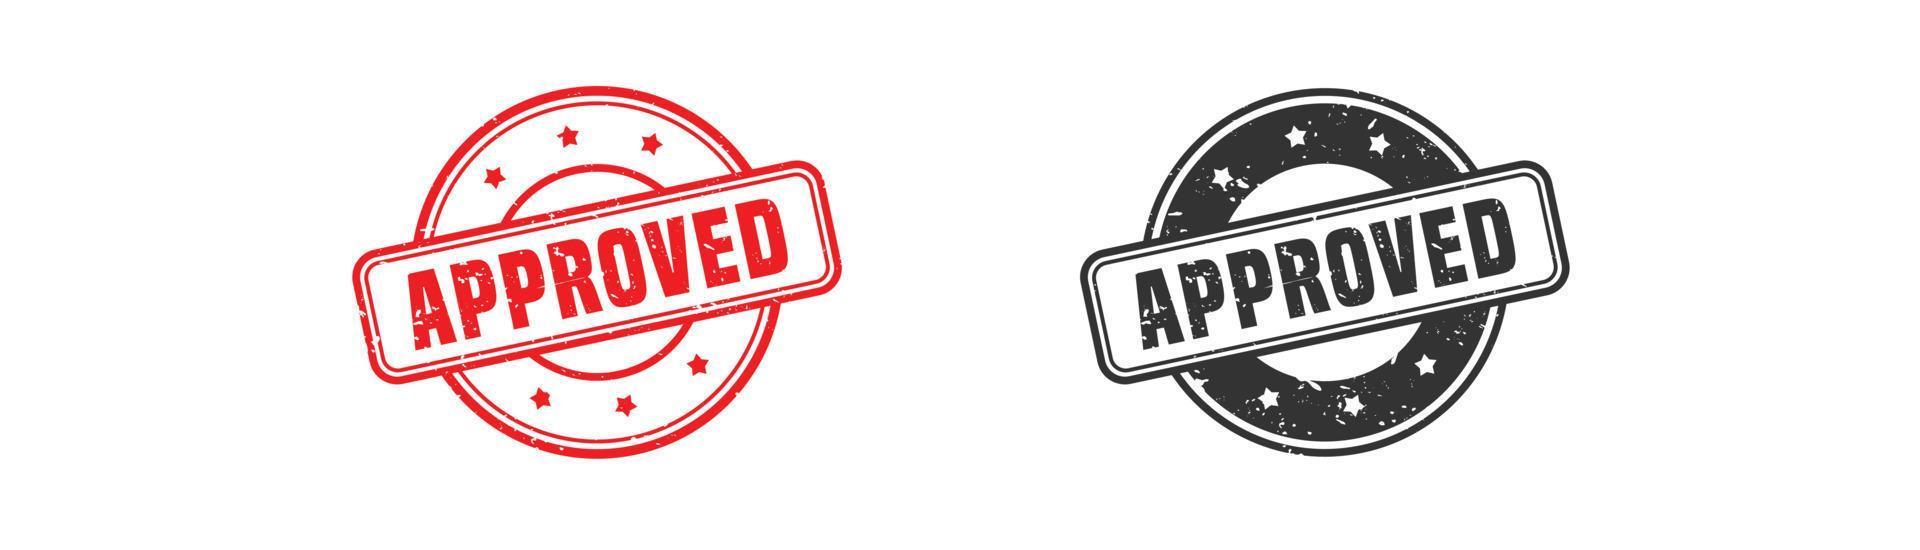 Approved stamp rubber with grunge style on white background vector